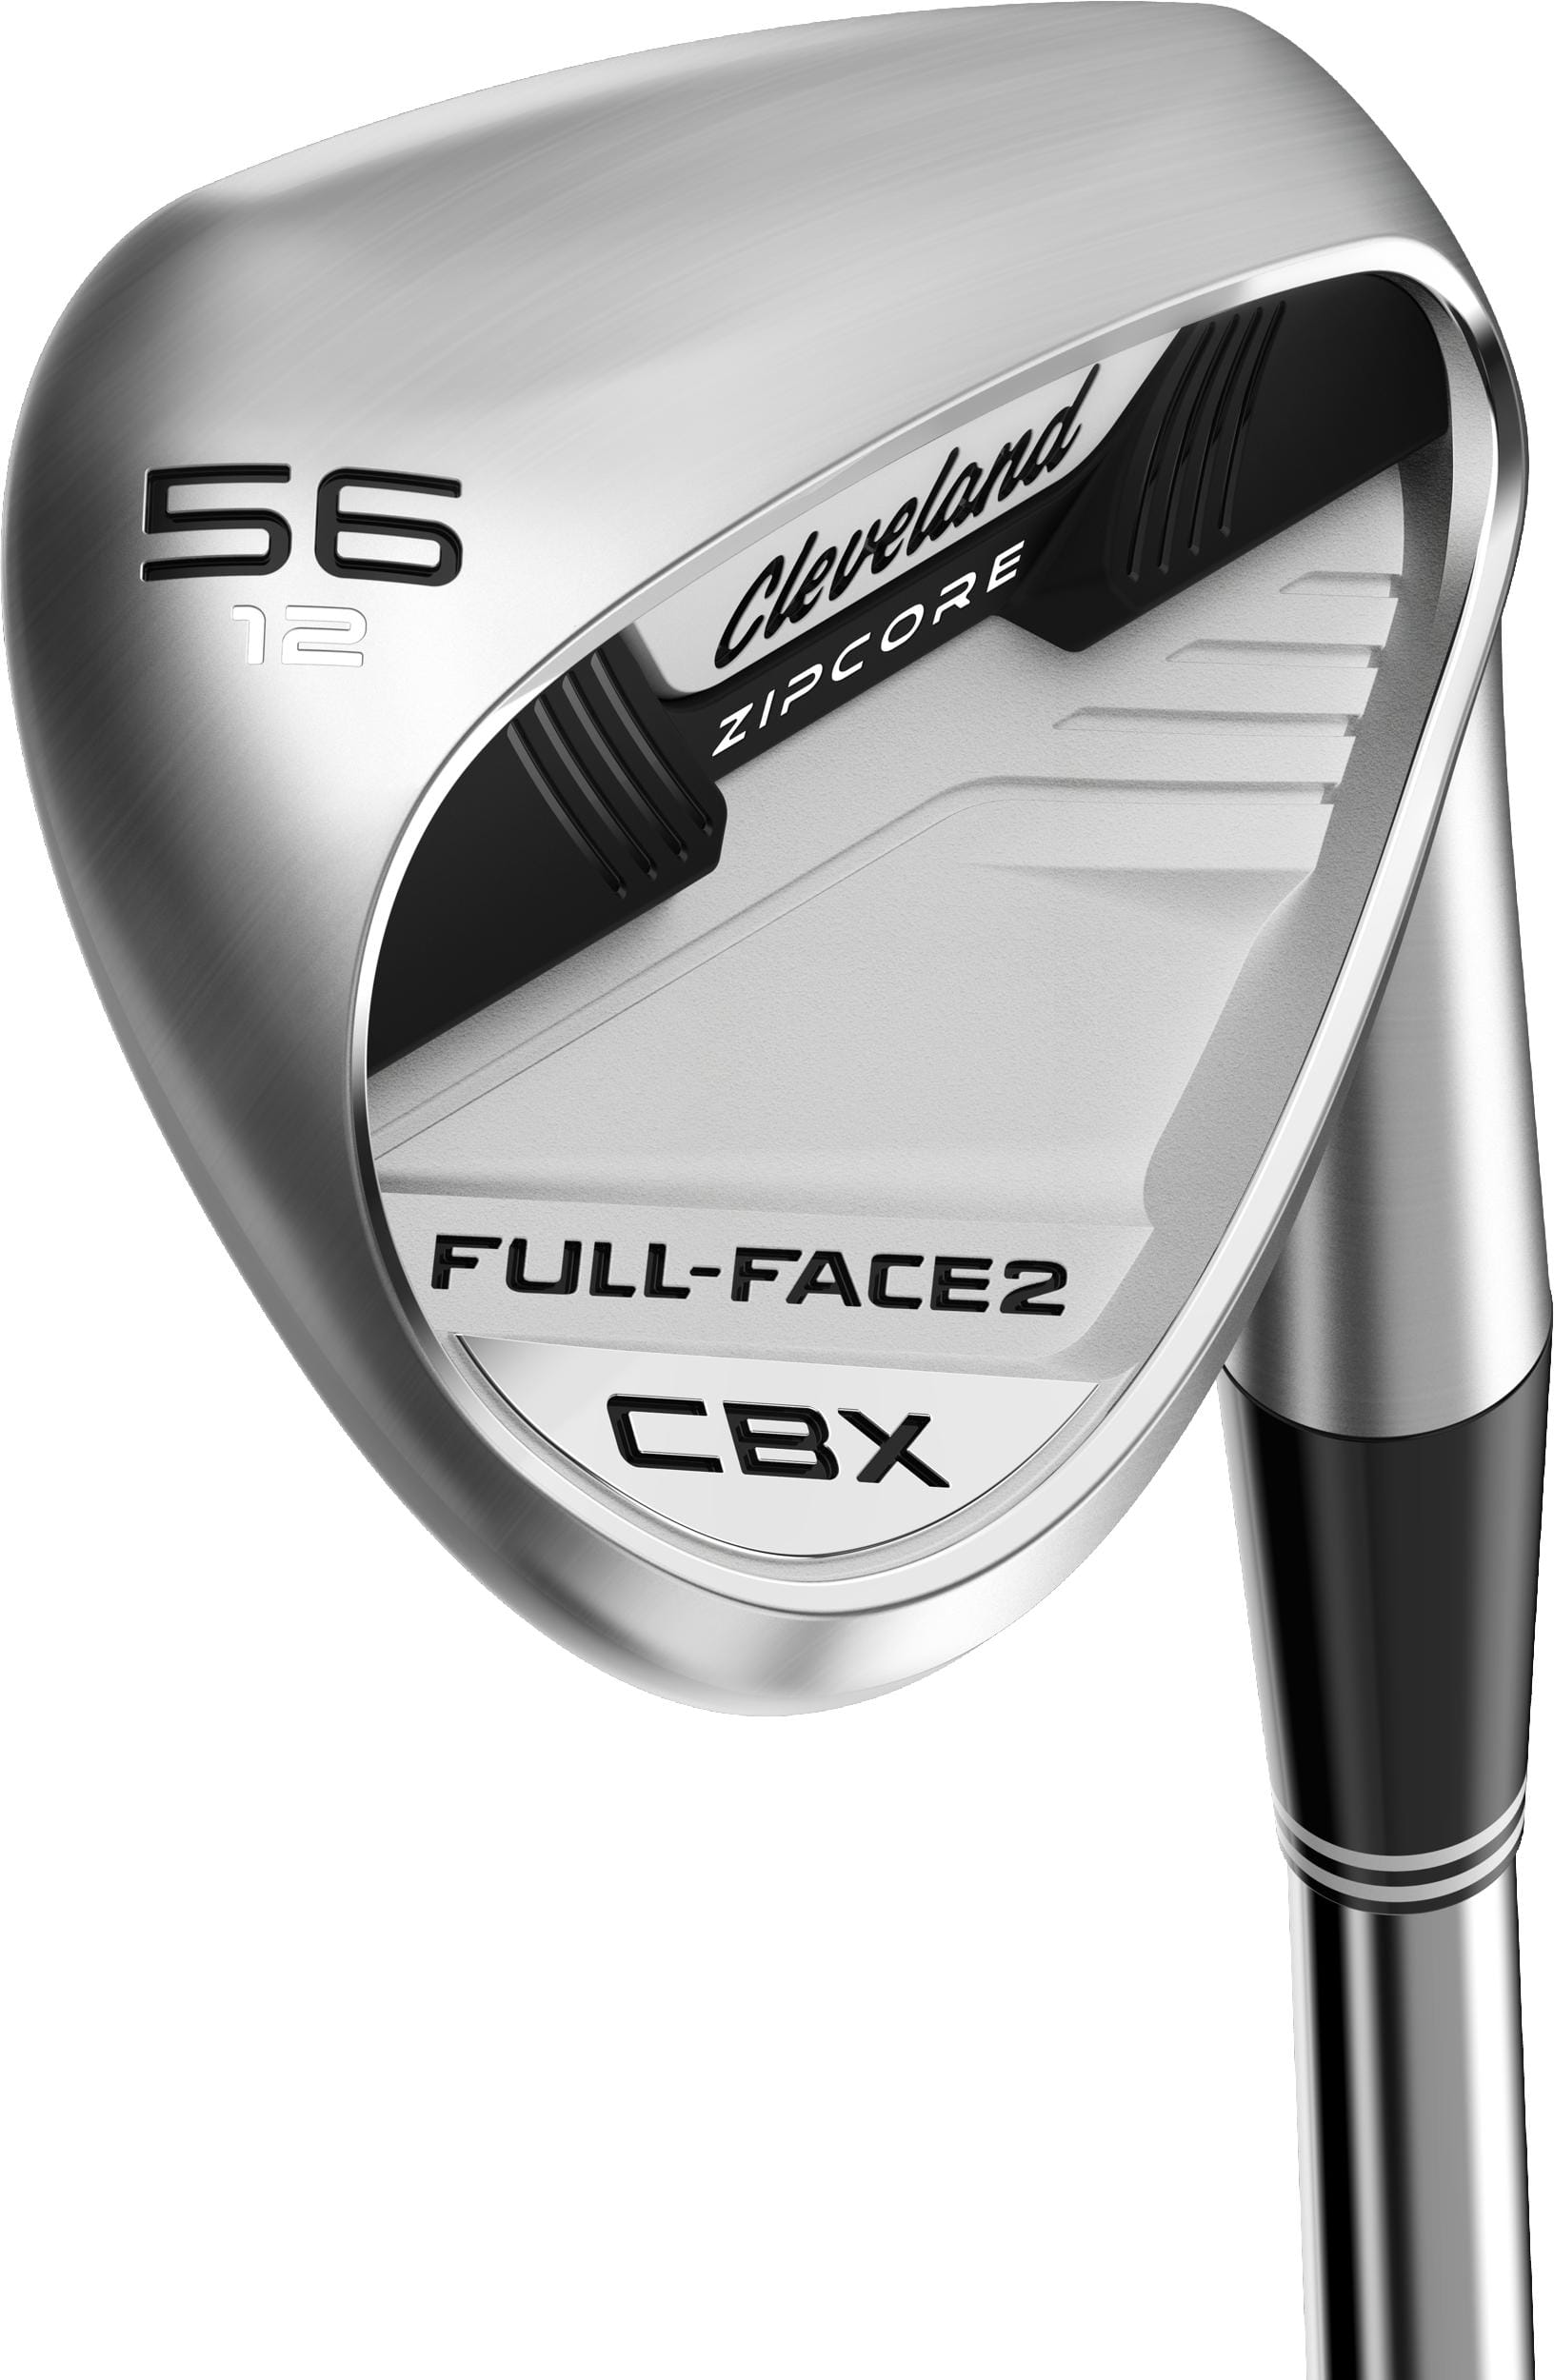 Cleveland CBX Full-Face 2 Tour Satin Wedge, Graphit